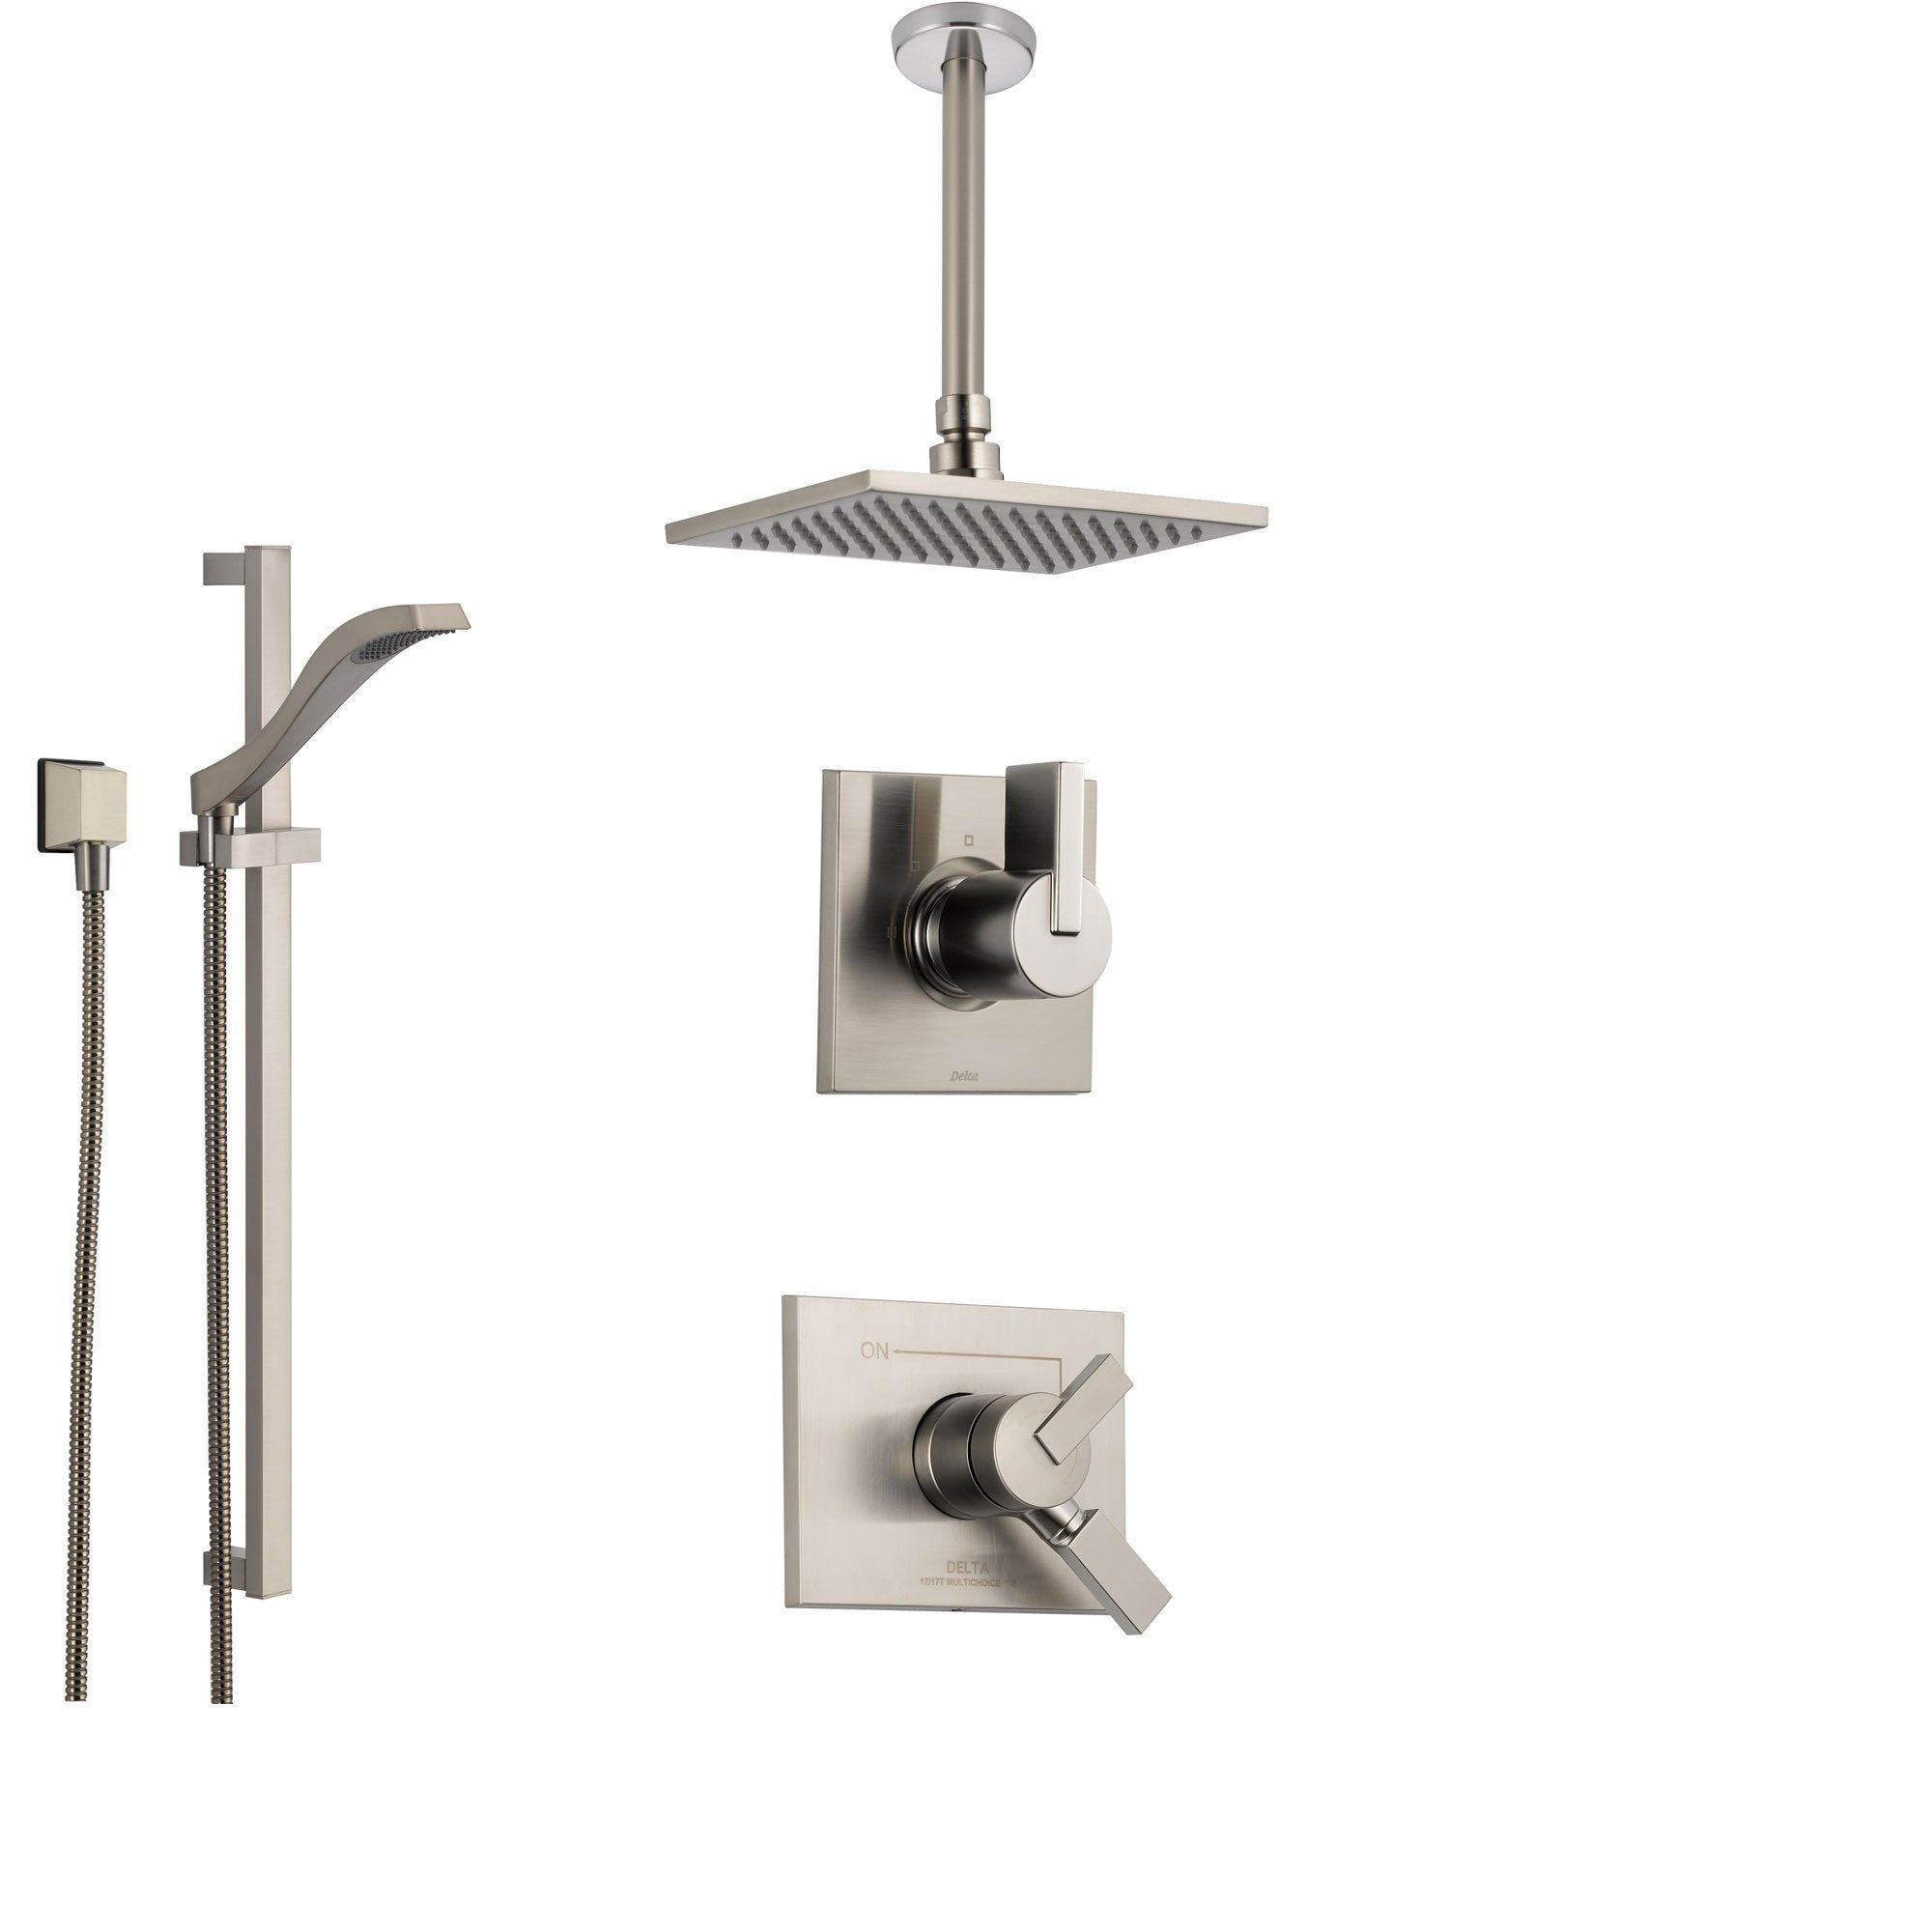 Delta Vero Stainless Steel Shower System with Dual Control Shower Handle, 3-setting Diverter, Large Square Ceiling Mount Showerhead, and Handheld Shower SS175383SS